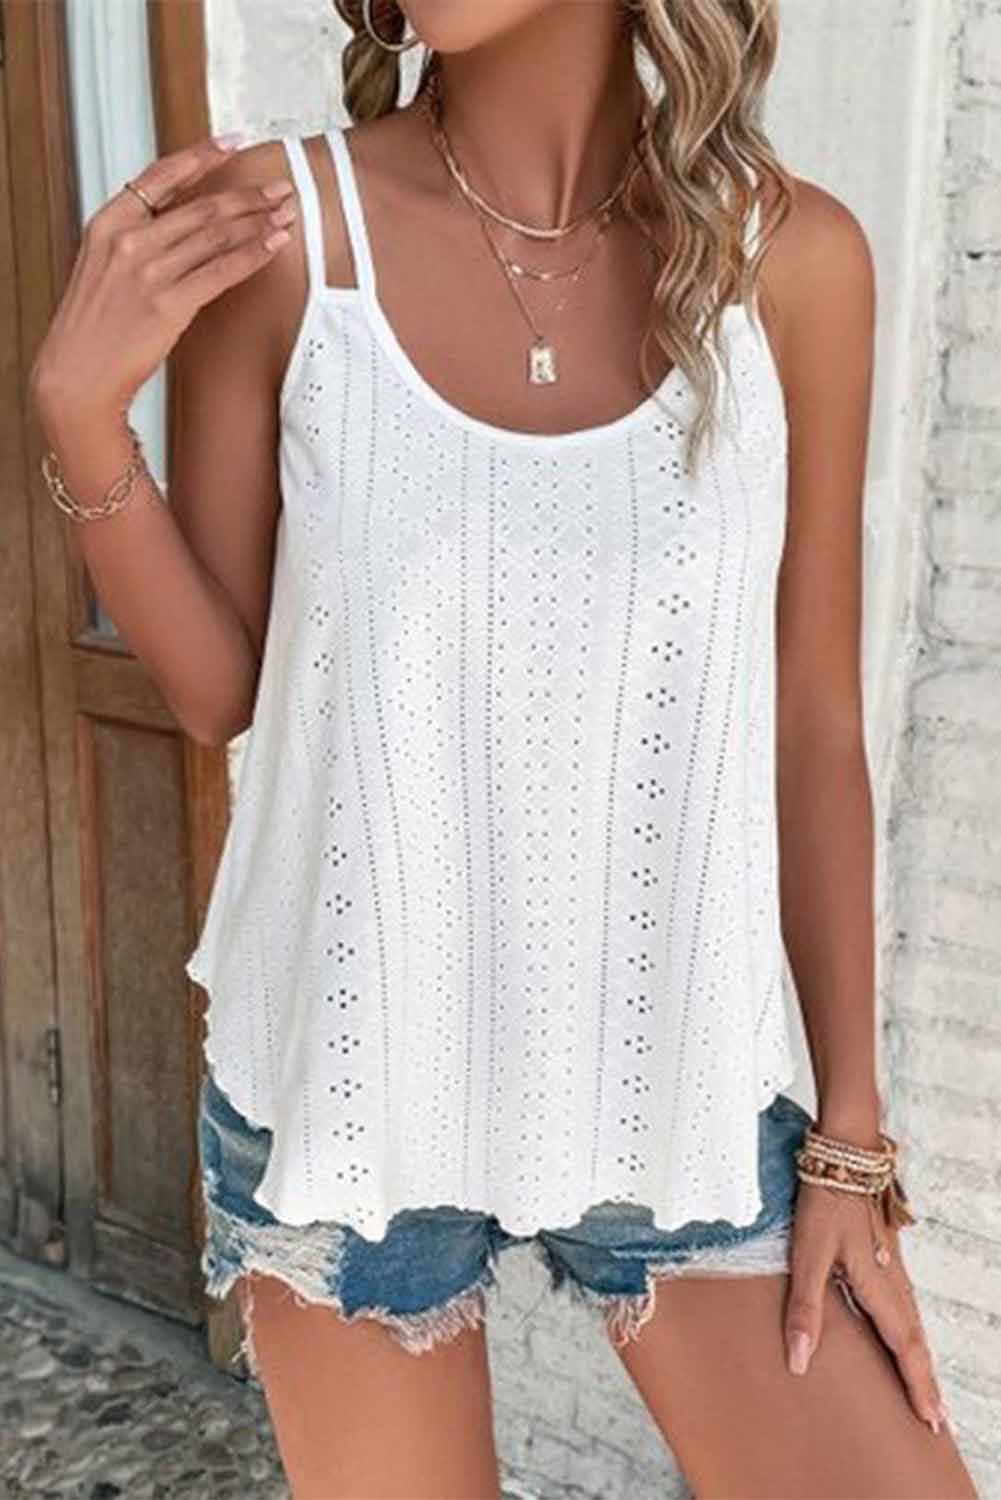 Pink Eyelet Strappy Scoop-Neck Tank Top